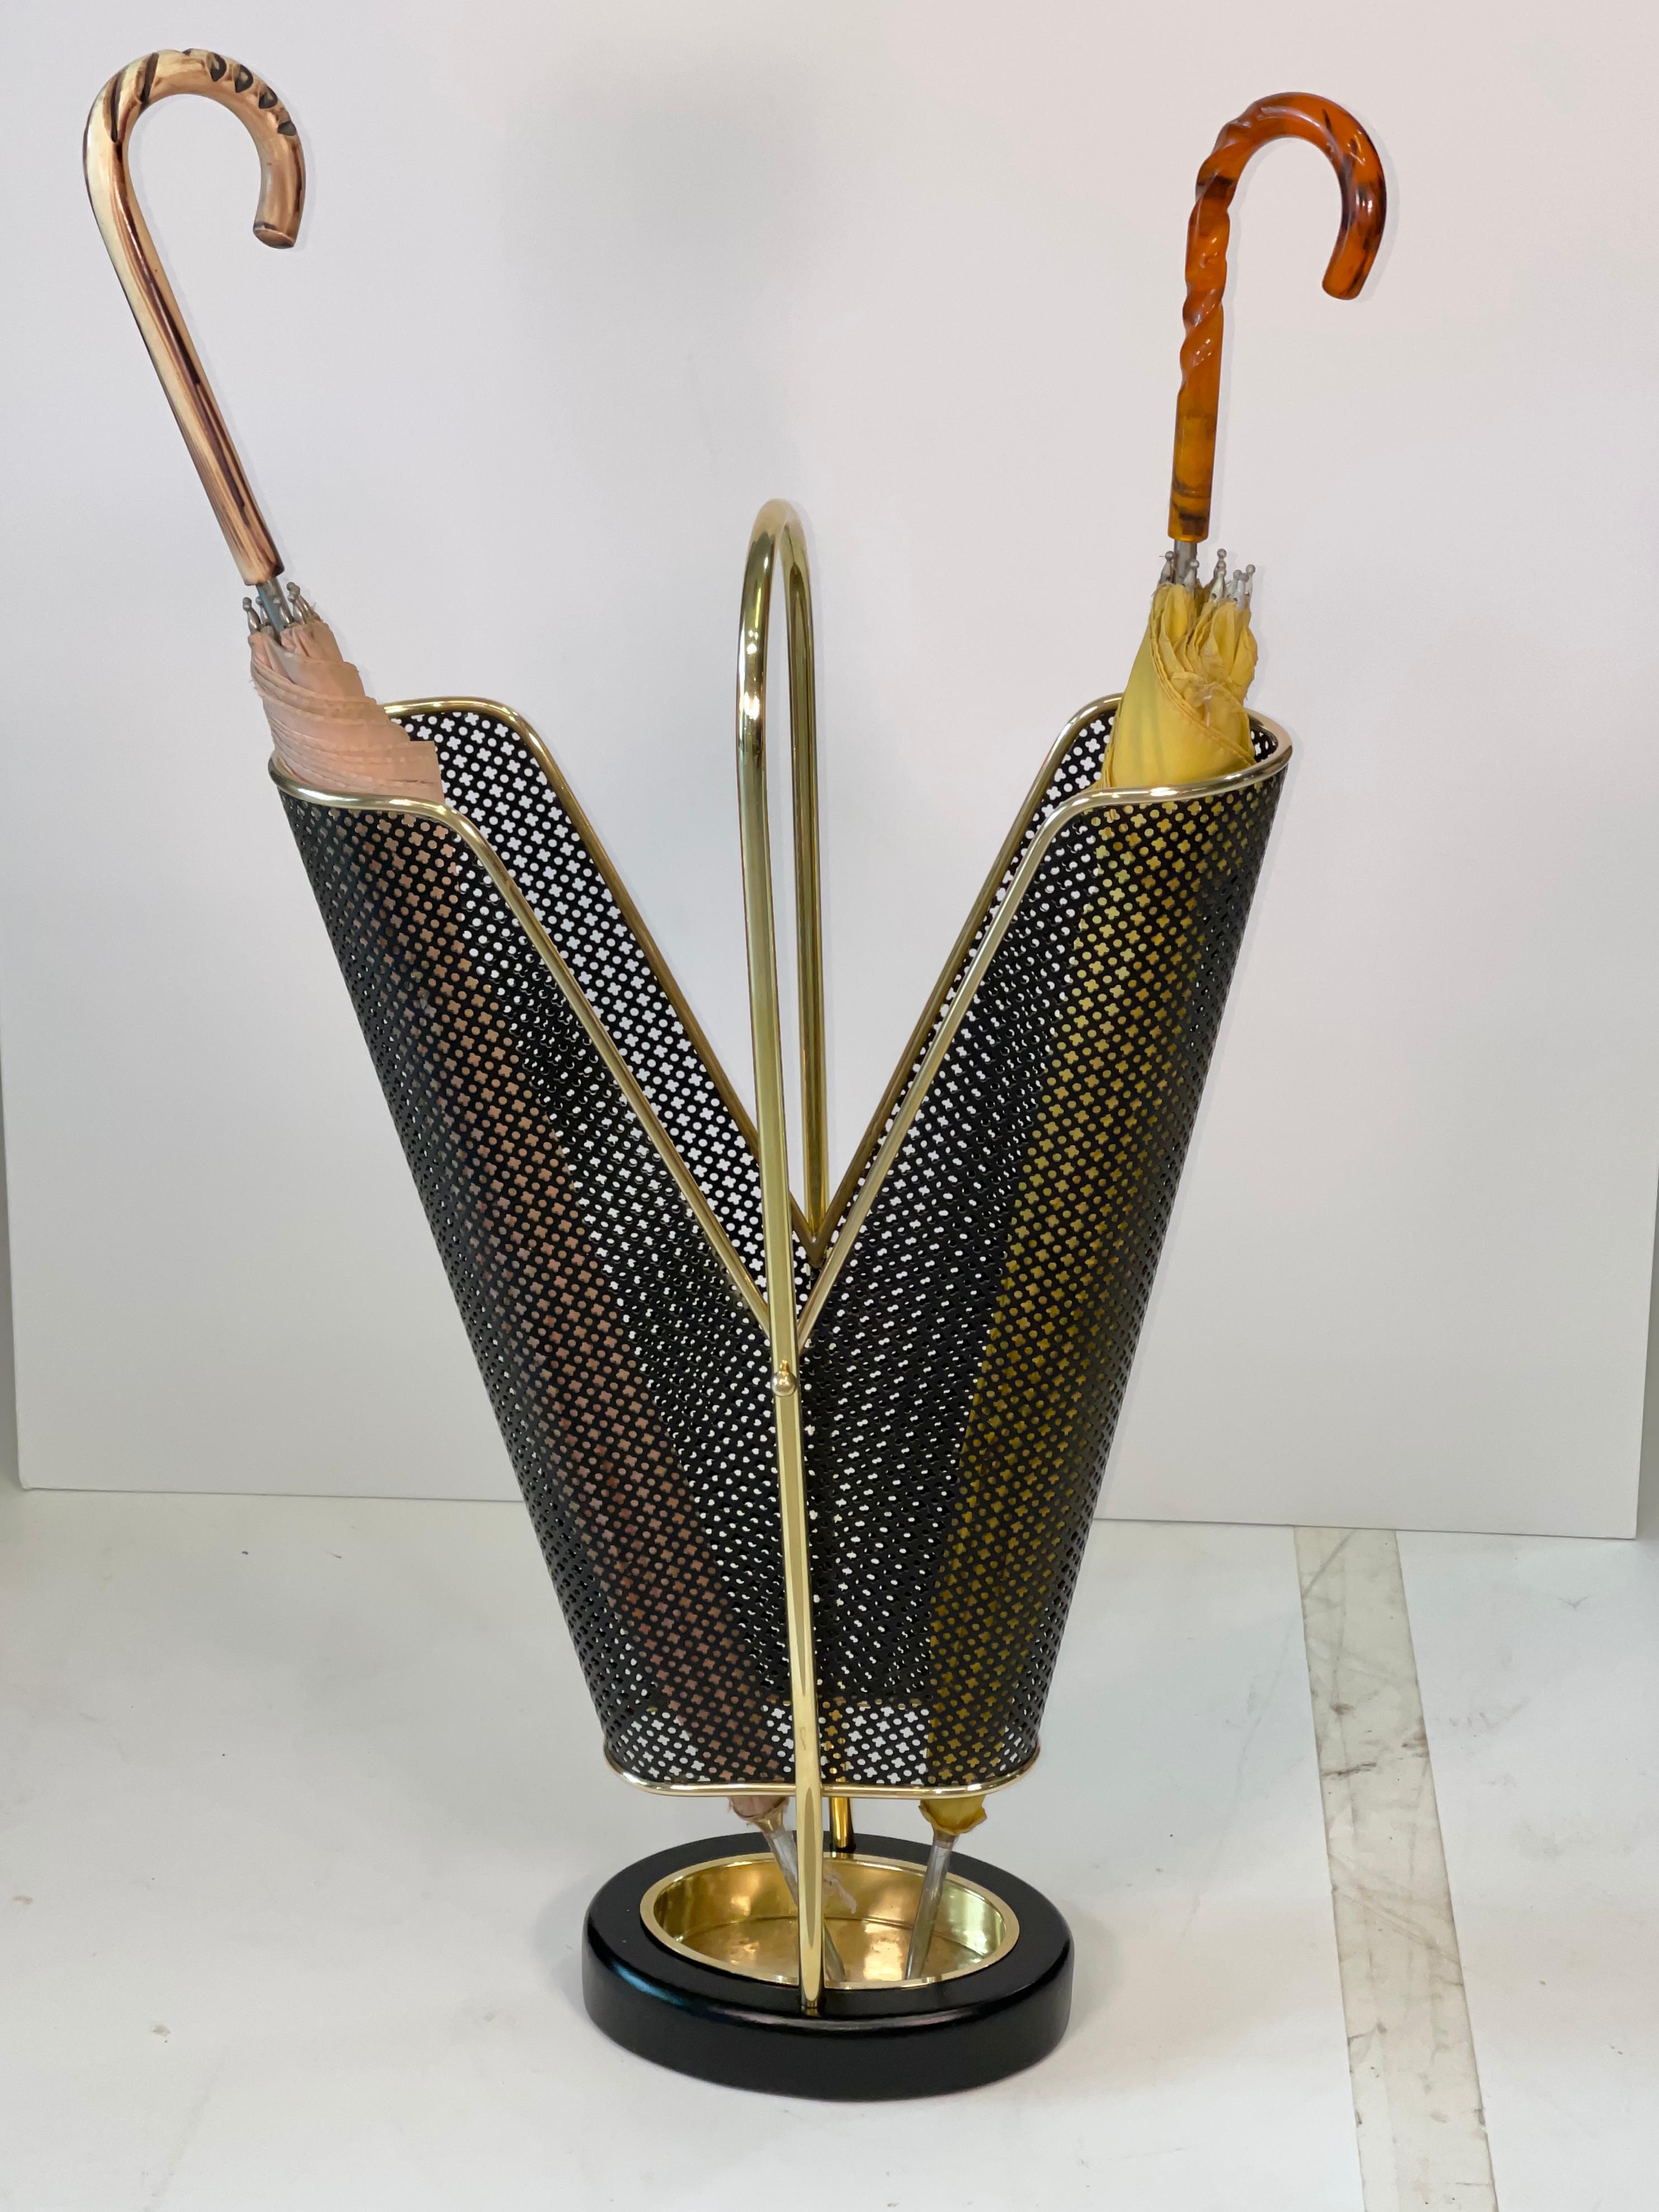 1950's German Brass and Perforated Metal Umbrella Stand In Good Condition For Sale In Hanover, MA